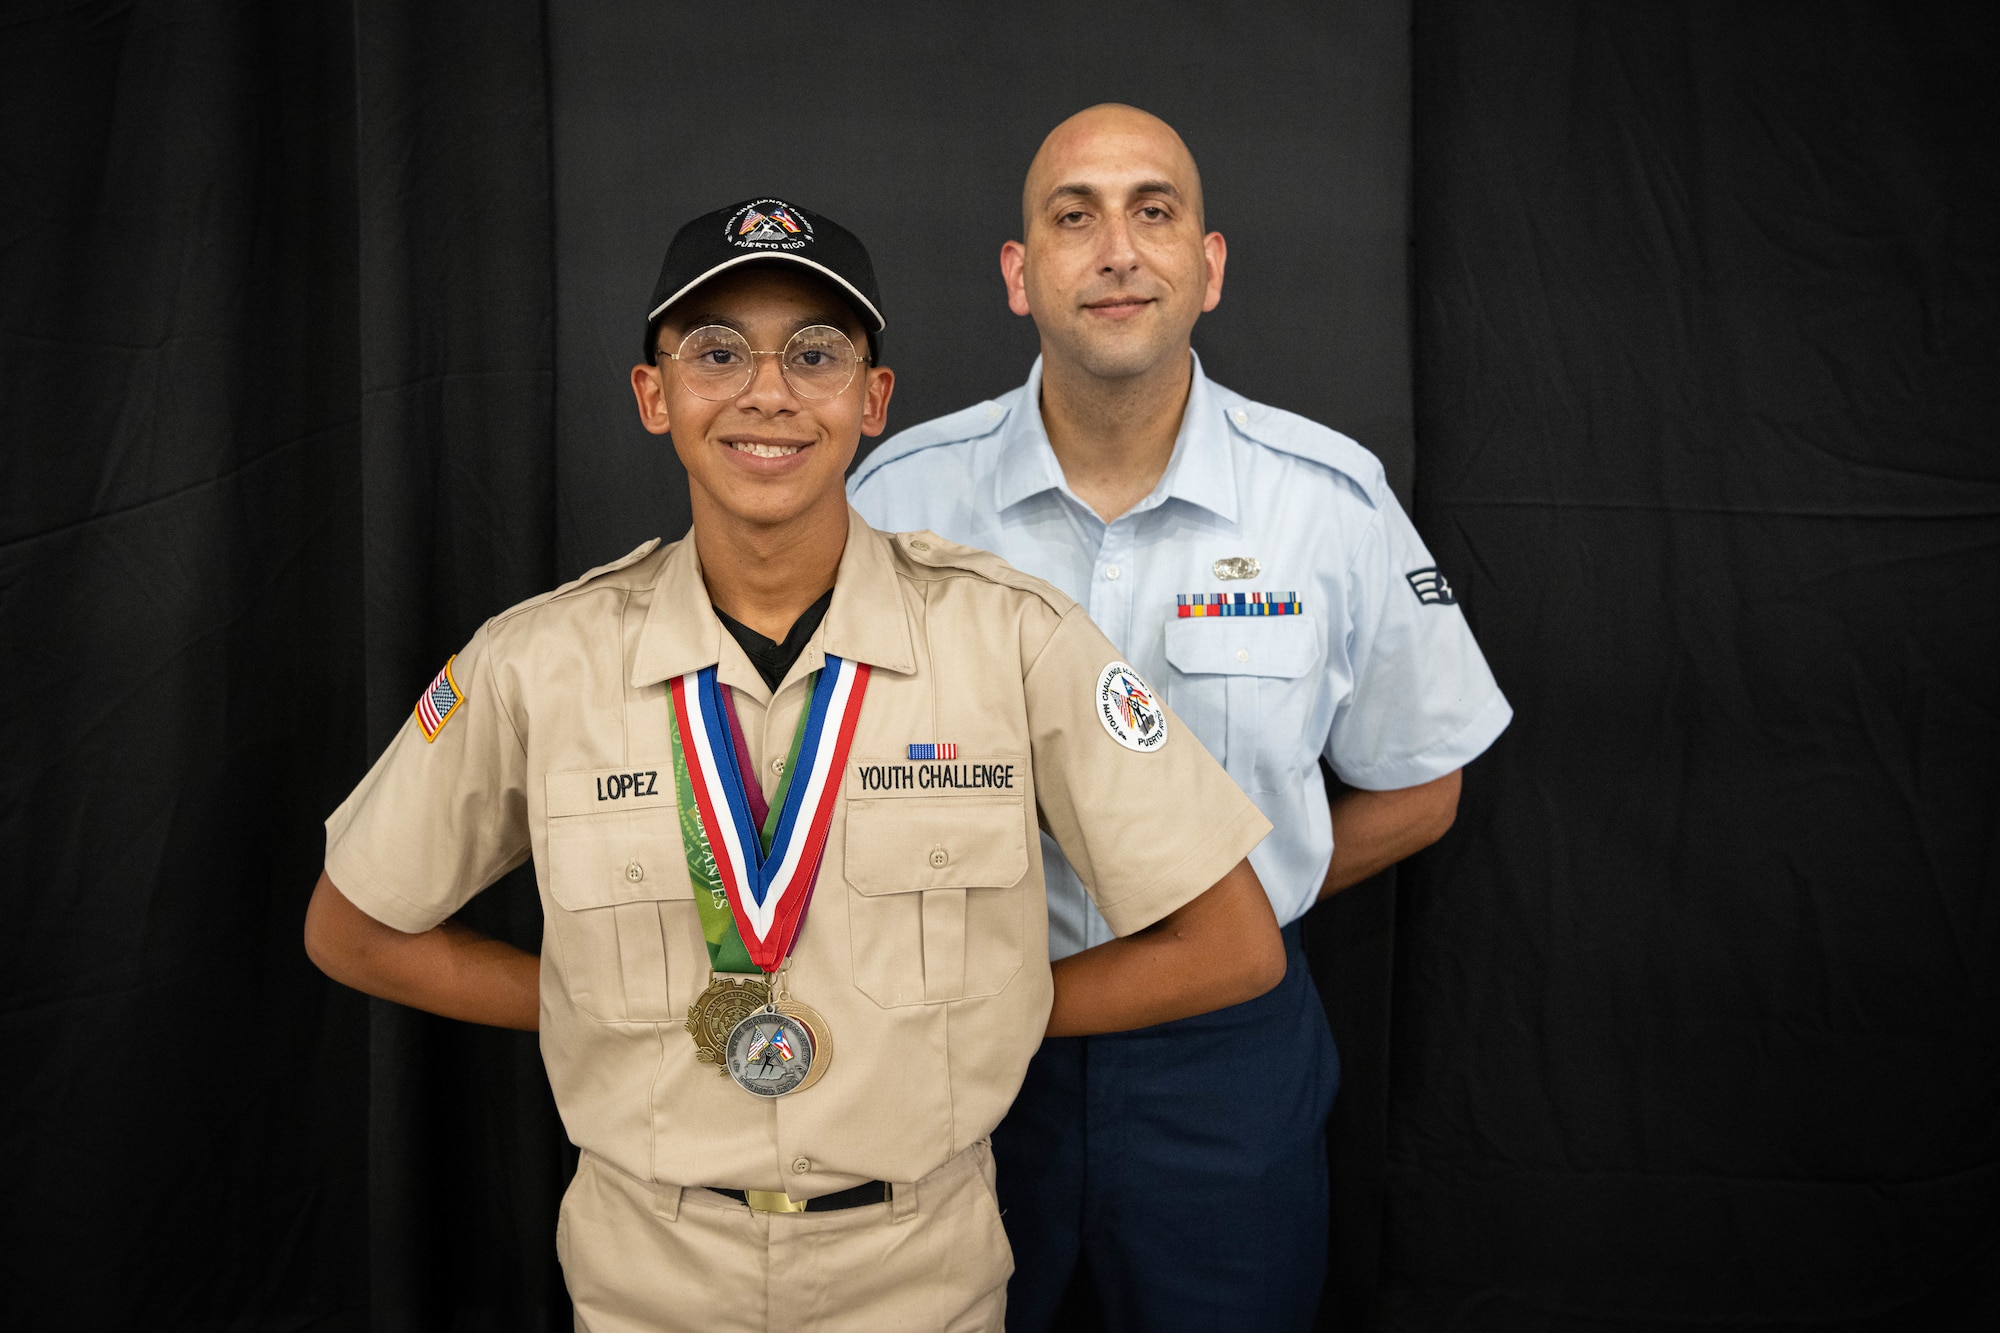 Cadet Jan Lopez with the Puerto Rico National Guard Youth ChalleNGe Academy, 3rd Platoon, Wolfpack, Class 23-02, poses for a photo with his father, U.S. Air Force Senior Airman Hector Lopez Rosa, a financial management technician with the 156th Comptroller Flight, Puerto Rico Air National Guard, during his graduation ceremony at Pontifical Catholic University of Puerto Rico, Ponce, Puerto Rico, Sept. 15, 2023. Jan Lopez received his high school diploma after completing the 22-week PRNG Youth ChalleNGe Academy program, where he studied for his high school diploma and also received vocational education from several career fields. (U.S. Air National Guard photo by 2nd. Lt. Eliezer Soto)